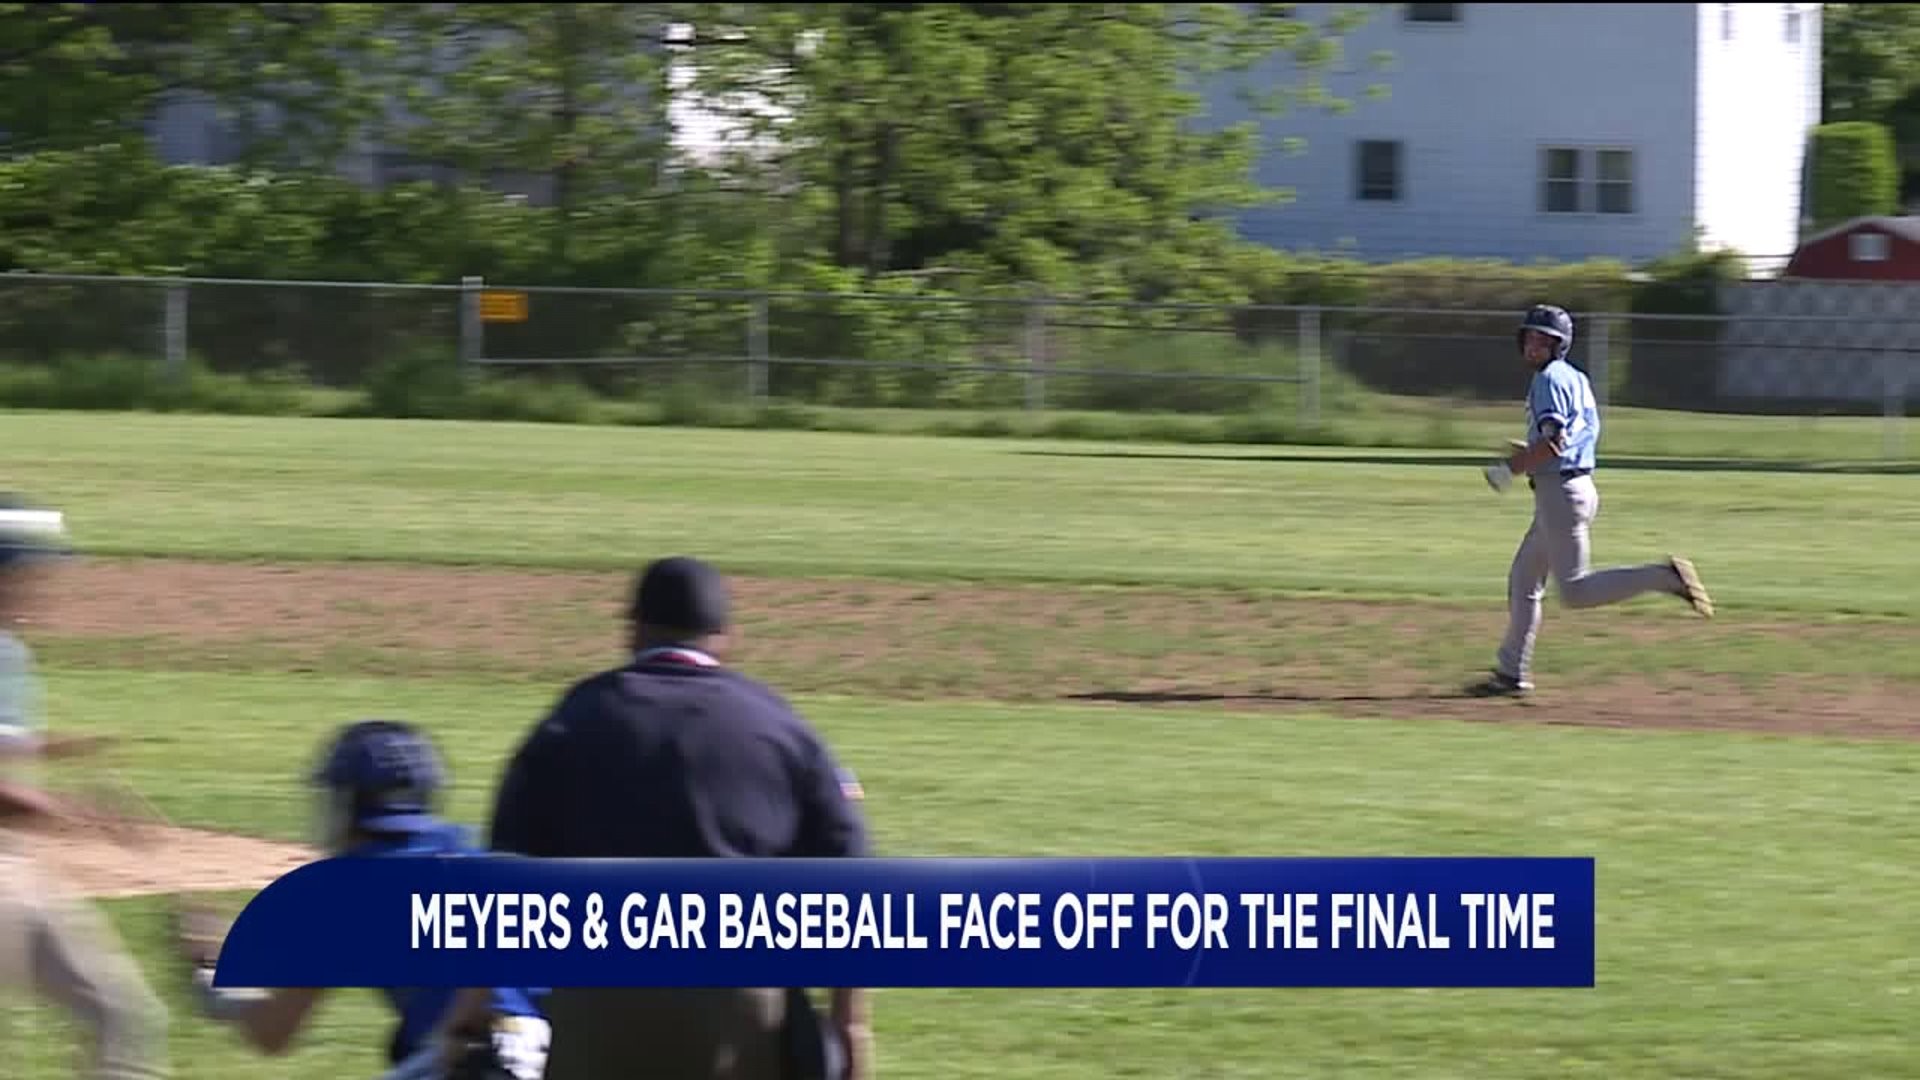 GAR and Meyers Face Off for the Final Time on the Baseball Diamond